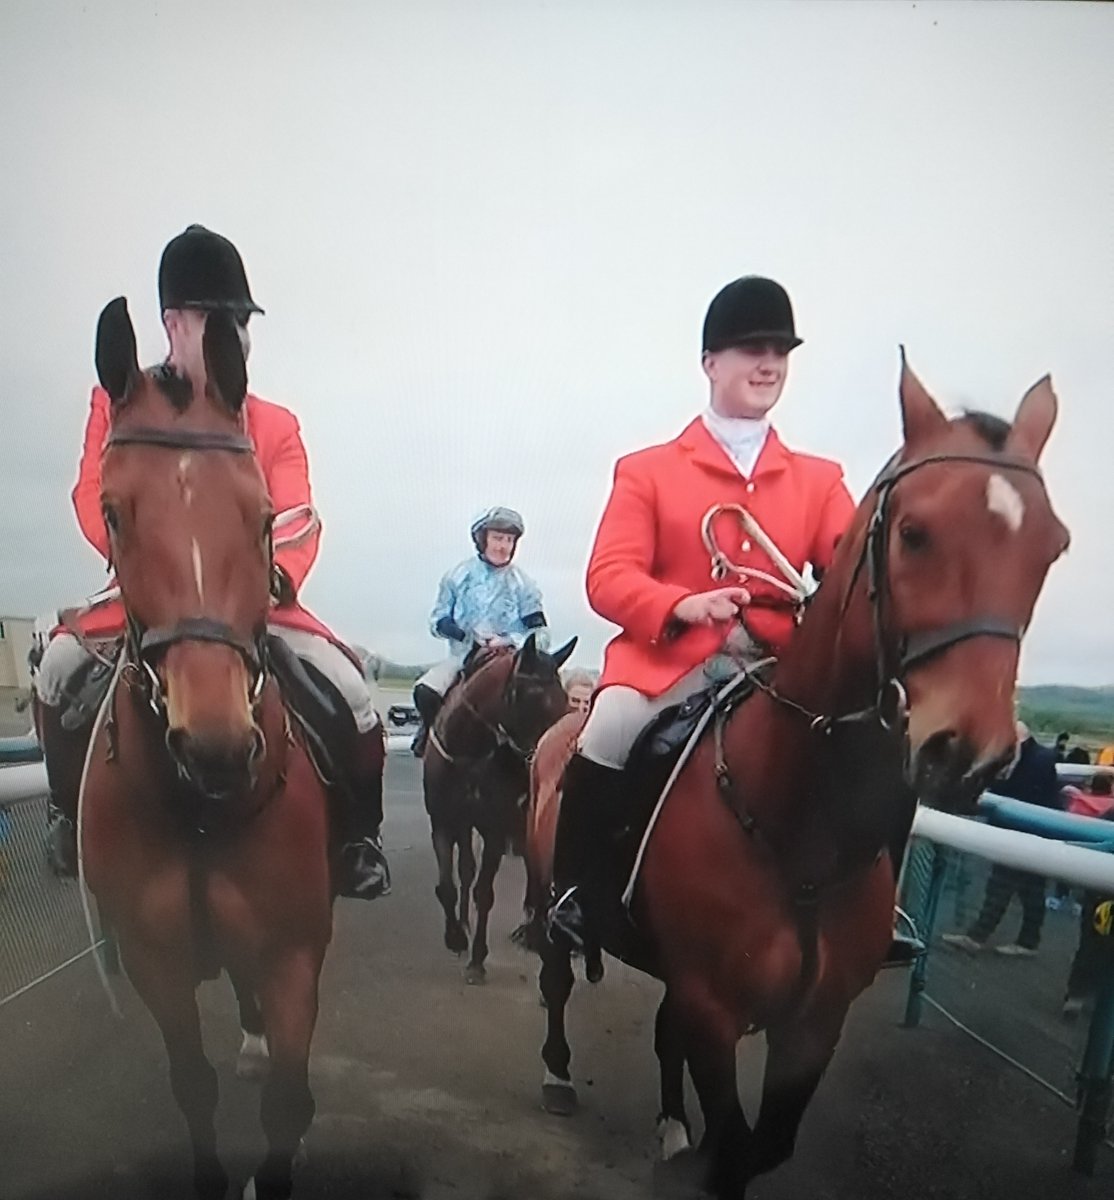 @RTEsport The barbaric bloodsport of foxhunting and racing is closely connected, hence the two red coated foxhunters leading the winning horse into the winners enclosure at Punchestown today.